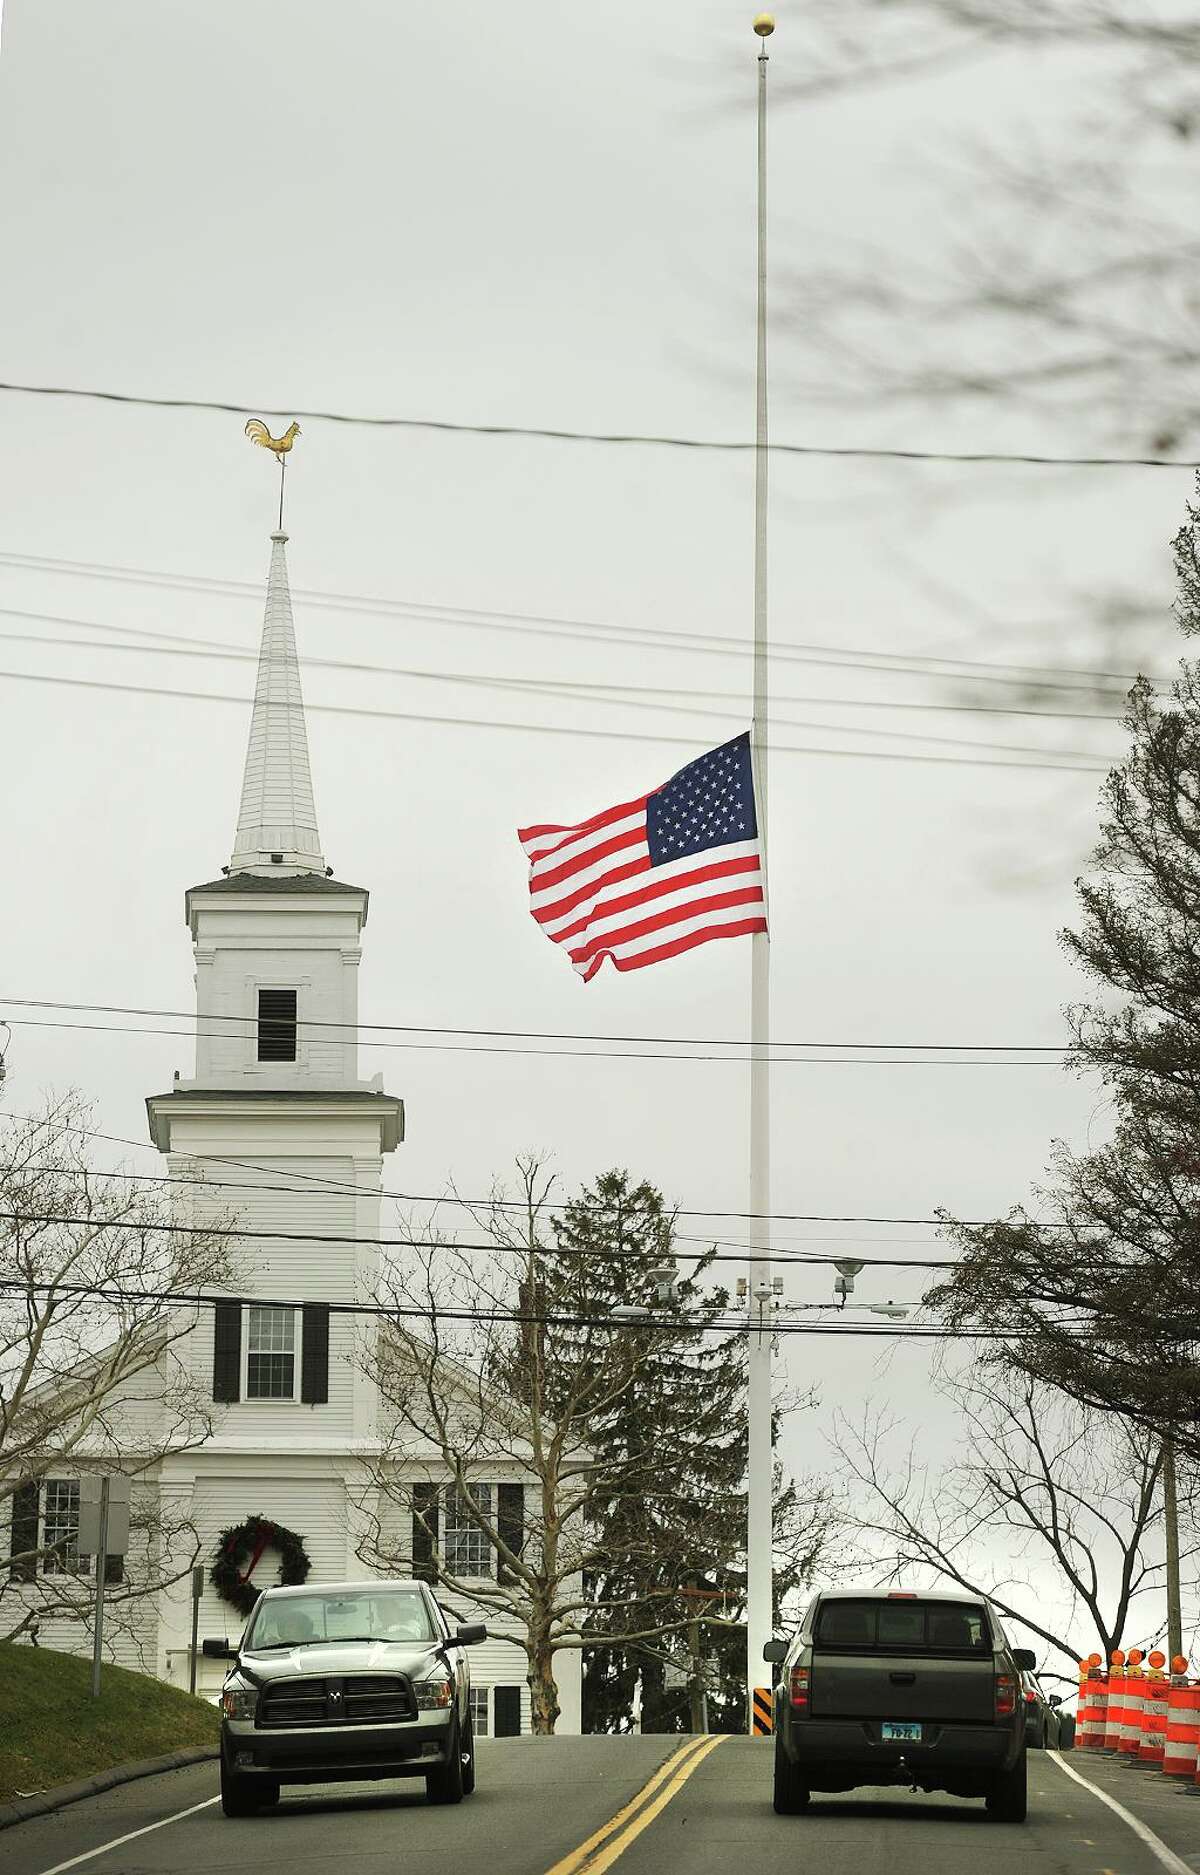 The American flag on the Newtown flagpole at the intersection of Route 25 and Church Hill Road flies at half staff on the second anniversary of the Sandy Hook Elementary School killings in Newtown, Conn.on Sunday, December 14, 2014. During the same episode, a Virginia couple described experiencing similar online harassment as Pozner. Matt and Maatje Benassi were subjects of online harassment, alleging that Maatje Benassi was patient zero in the beginning of the COVID-19 pandemic. They turned to Pozner's HONR Network and with his help, were able to get a COVID-19 conspiracy theorist banned from YouTube. Pozner established the HONR Network in 2014, as a nonprofit that protects "the most vulnerable people from online harassment." "I think that people don't understand the concept of freedom of speech," Pozner said in the interview. "It doesn't give people the right to defame someone or incite others to hunt someone down. Just generally terrorizing someone is not free speech." Through his anti-harassment work, Pozner has filed defamation lawsuits against Alex Jones as well as the editors of a Sandy Hook hoax book. 